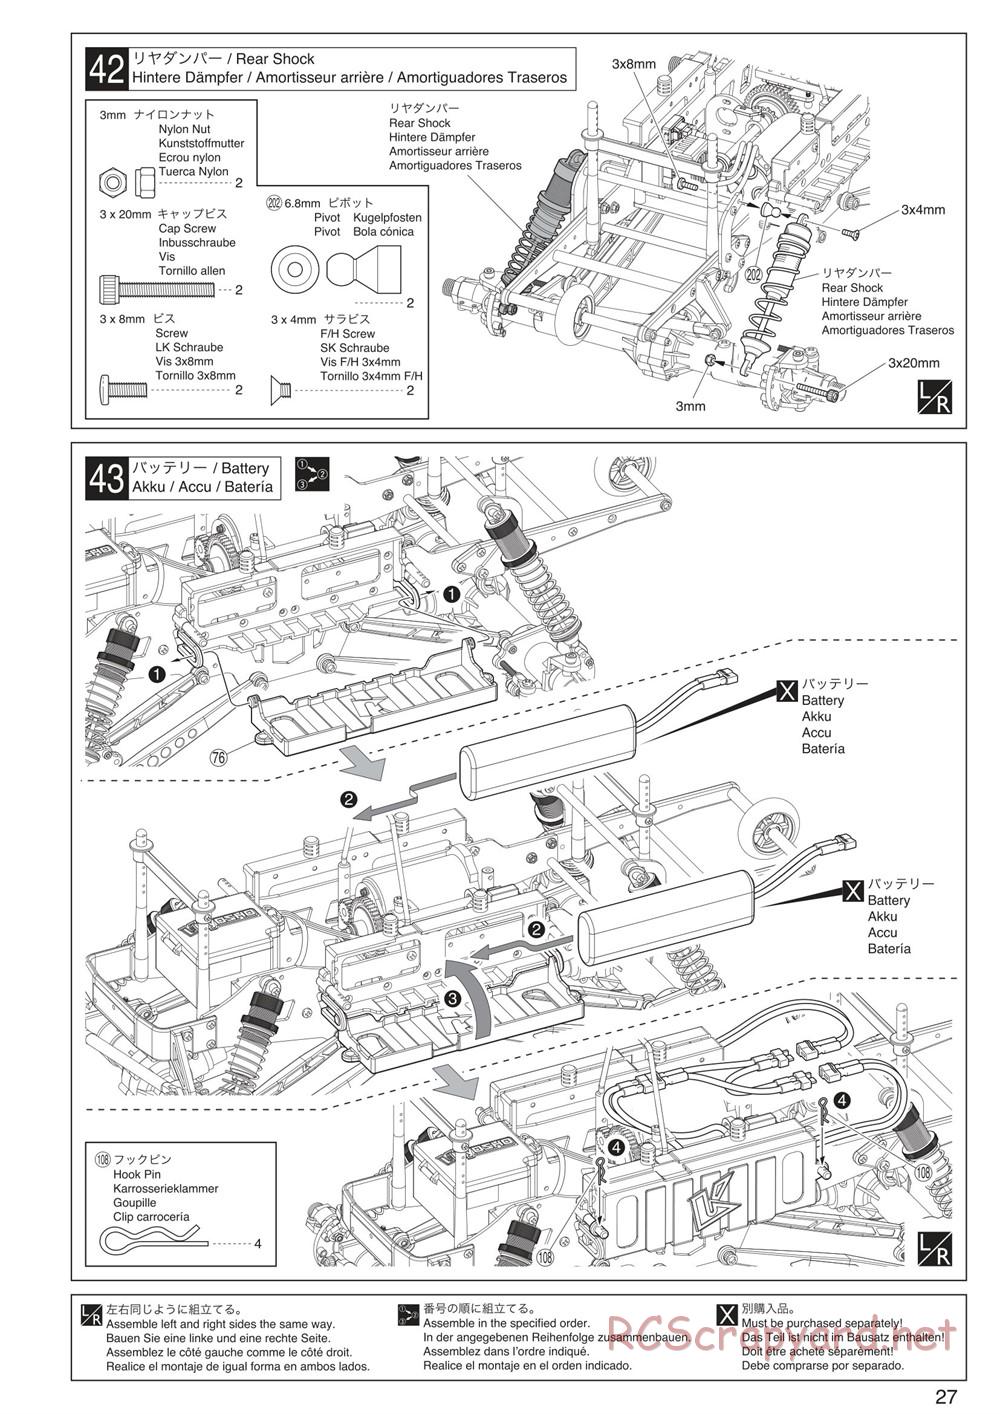 Kyosho - Mad Crusher VE - Manual - Page 27